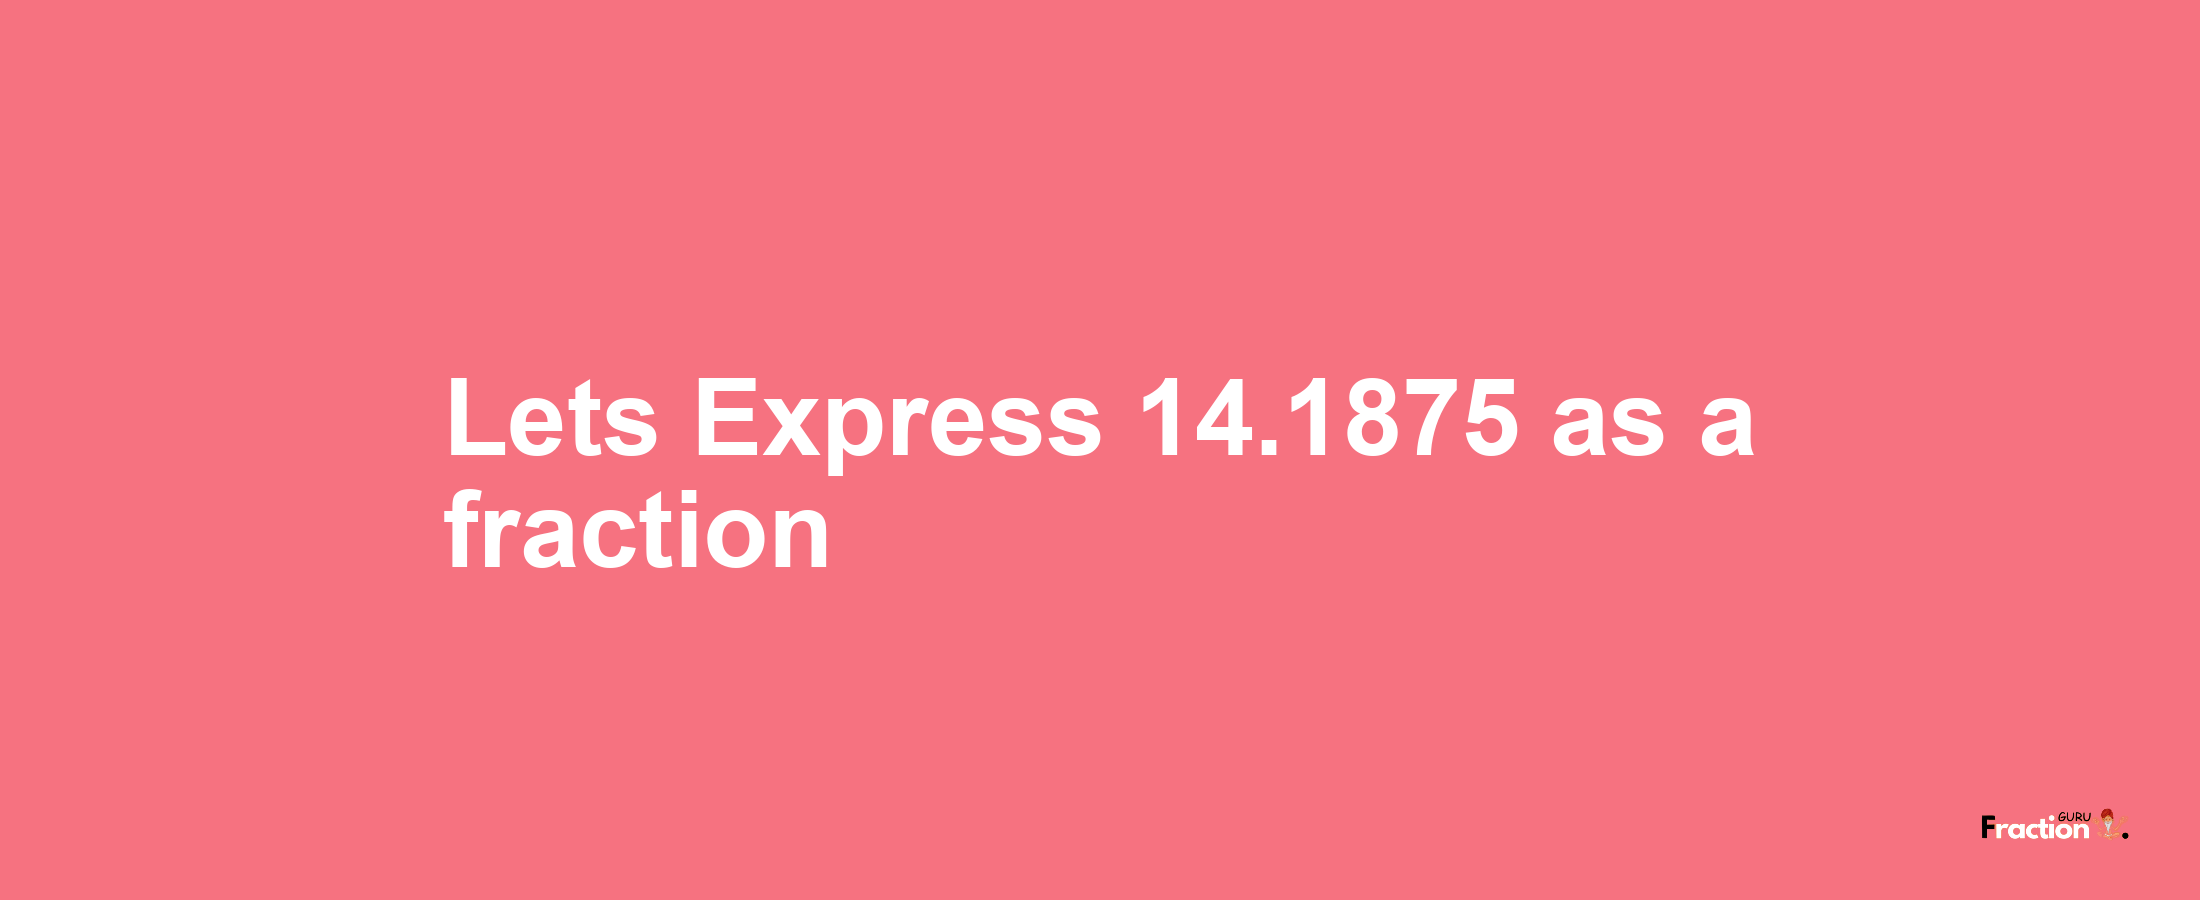 Lets Express 14.1875 as afraction